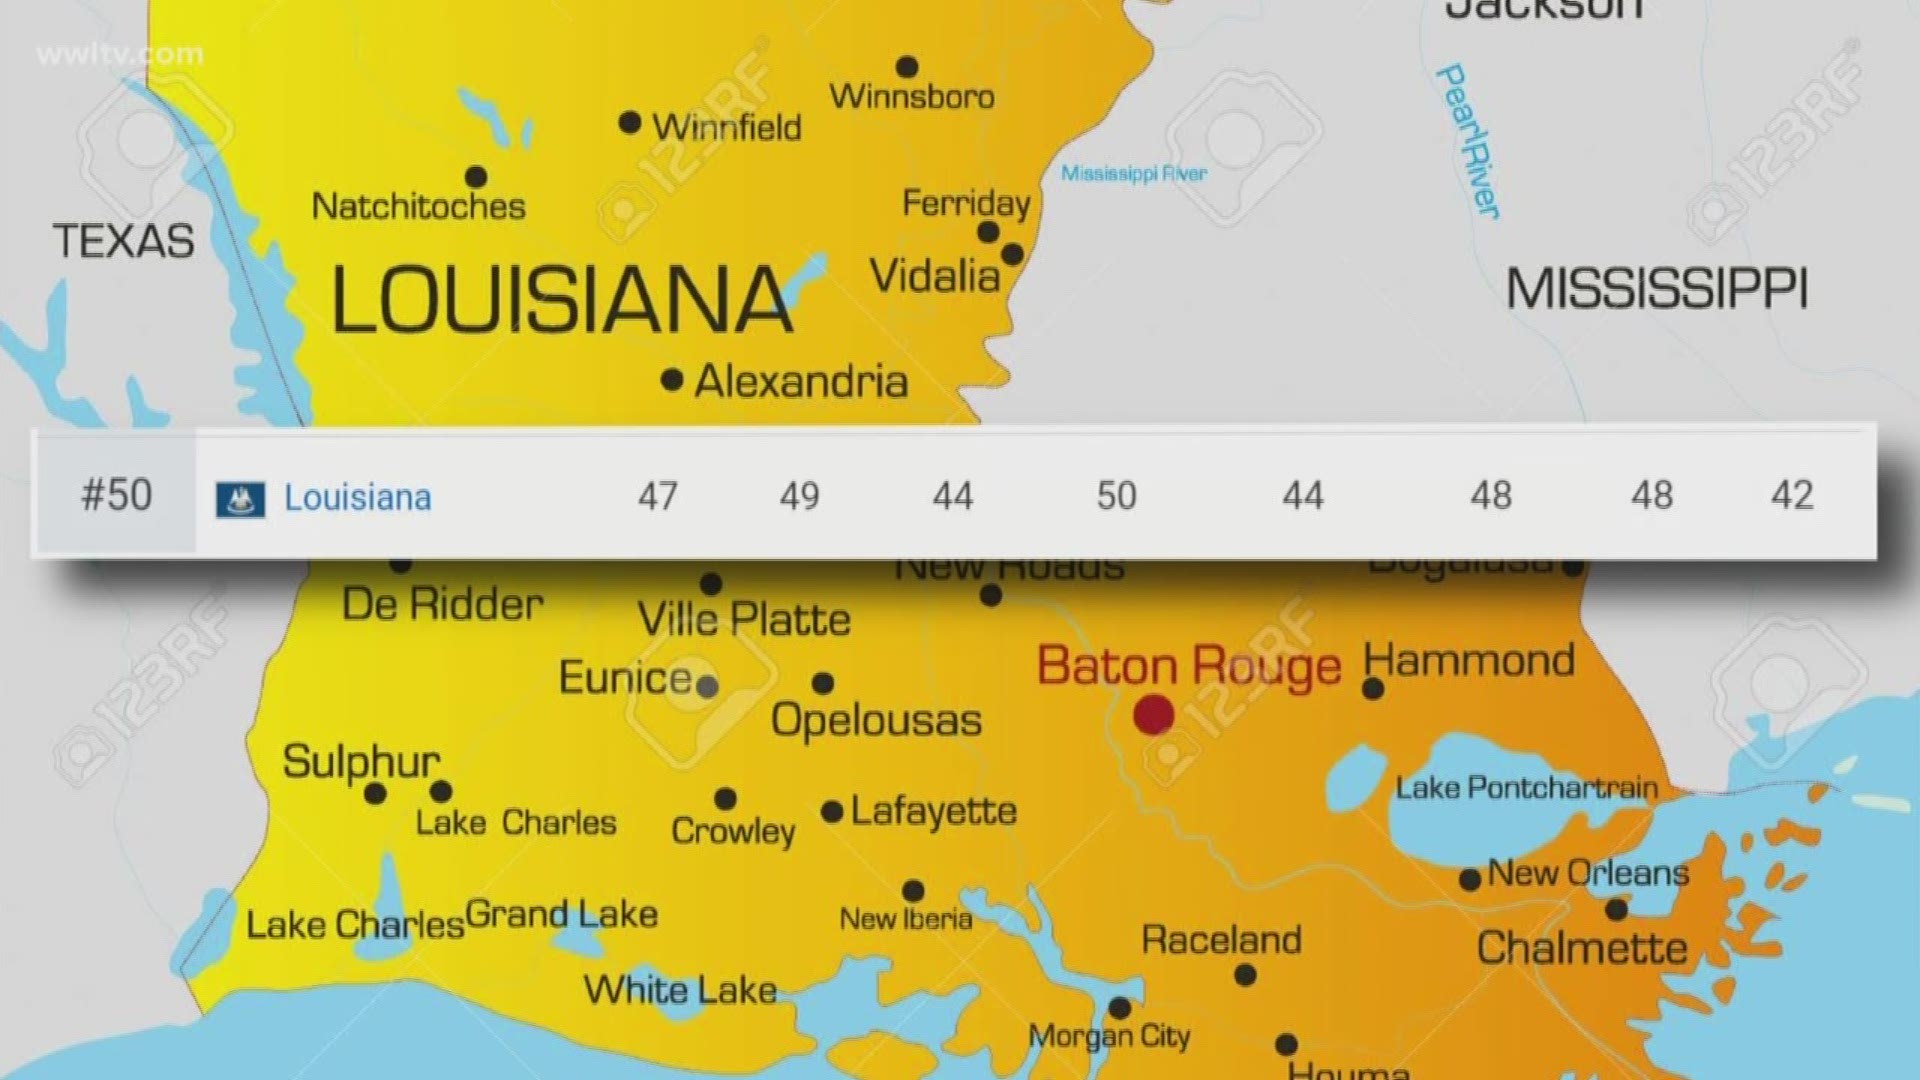 The U.S. News and World Report ranked Louisiana dead last as the worst state to live in. 